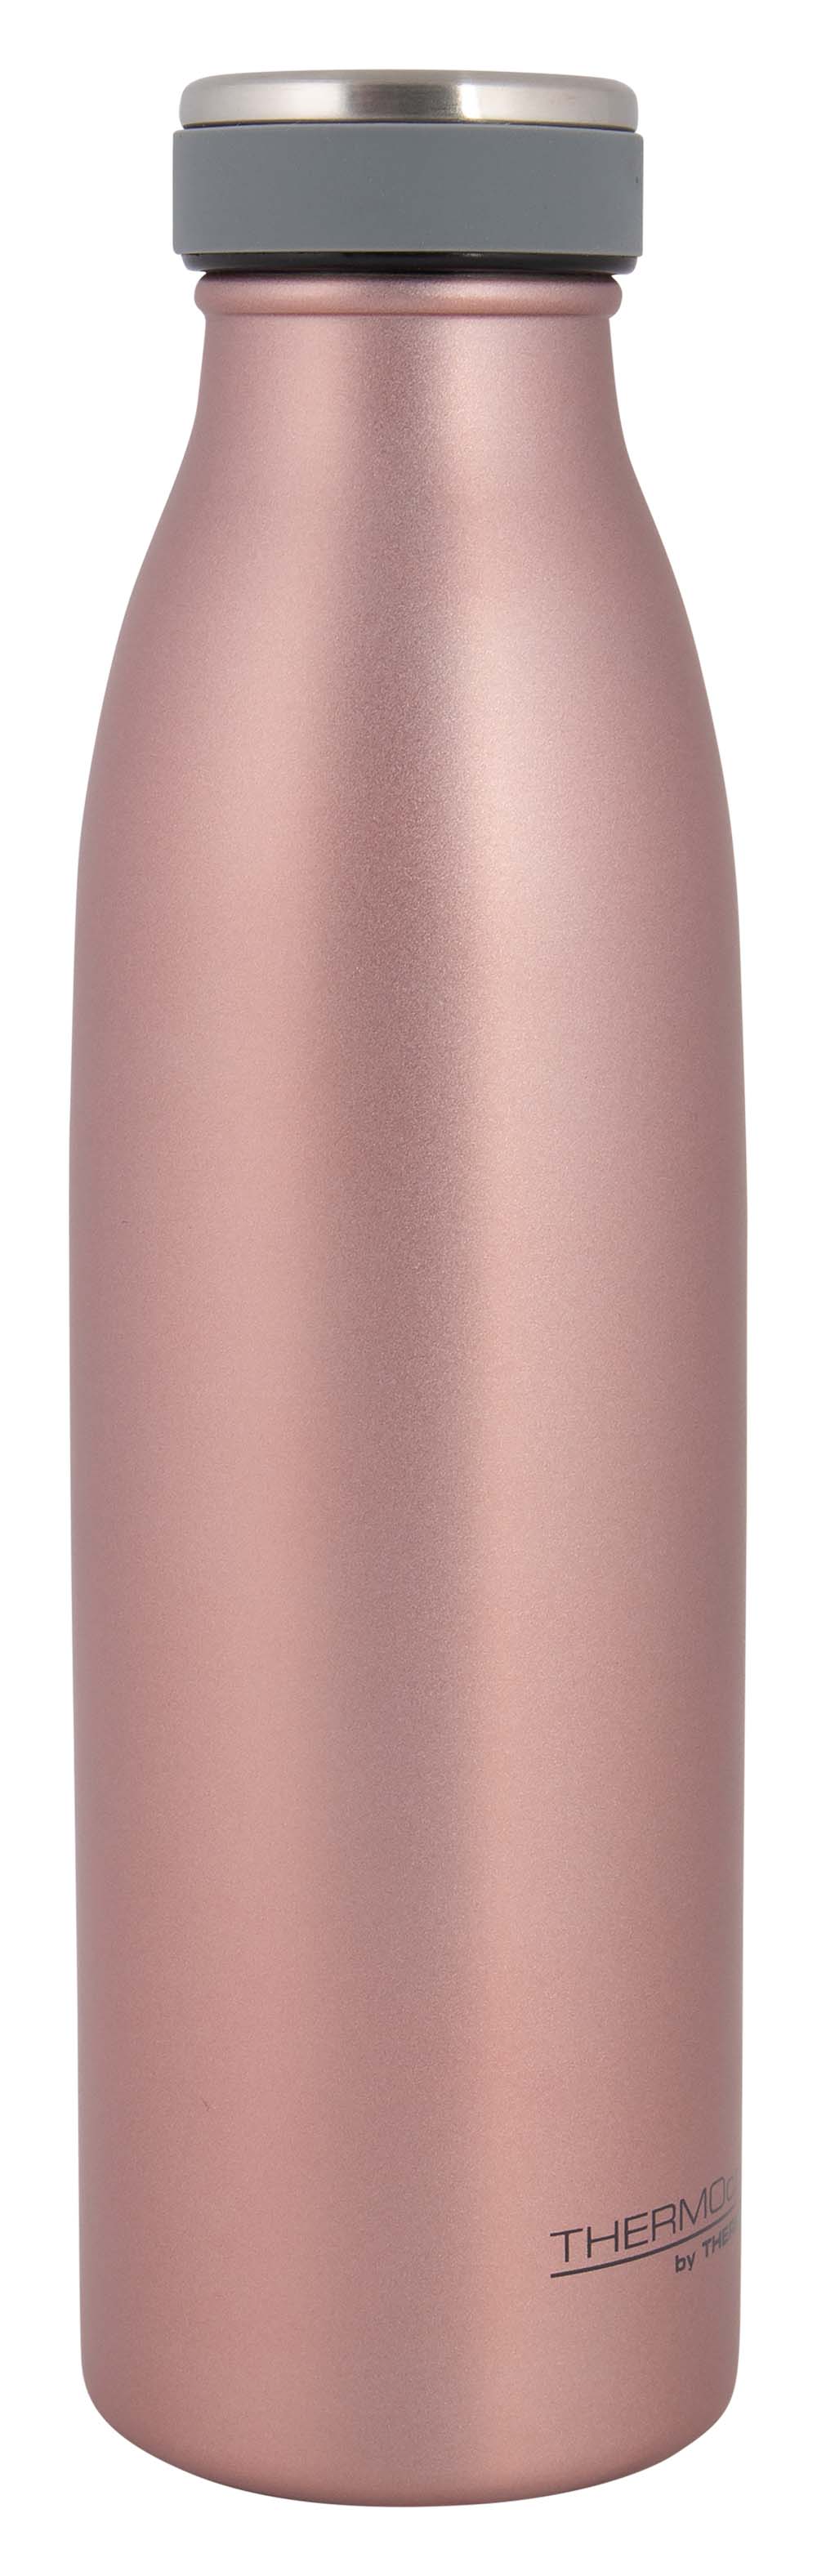 Thermos - Drinking Bottle - Cafe - Rose